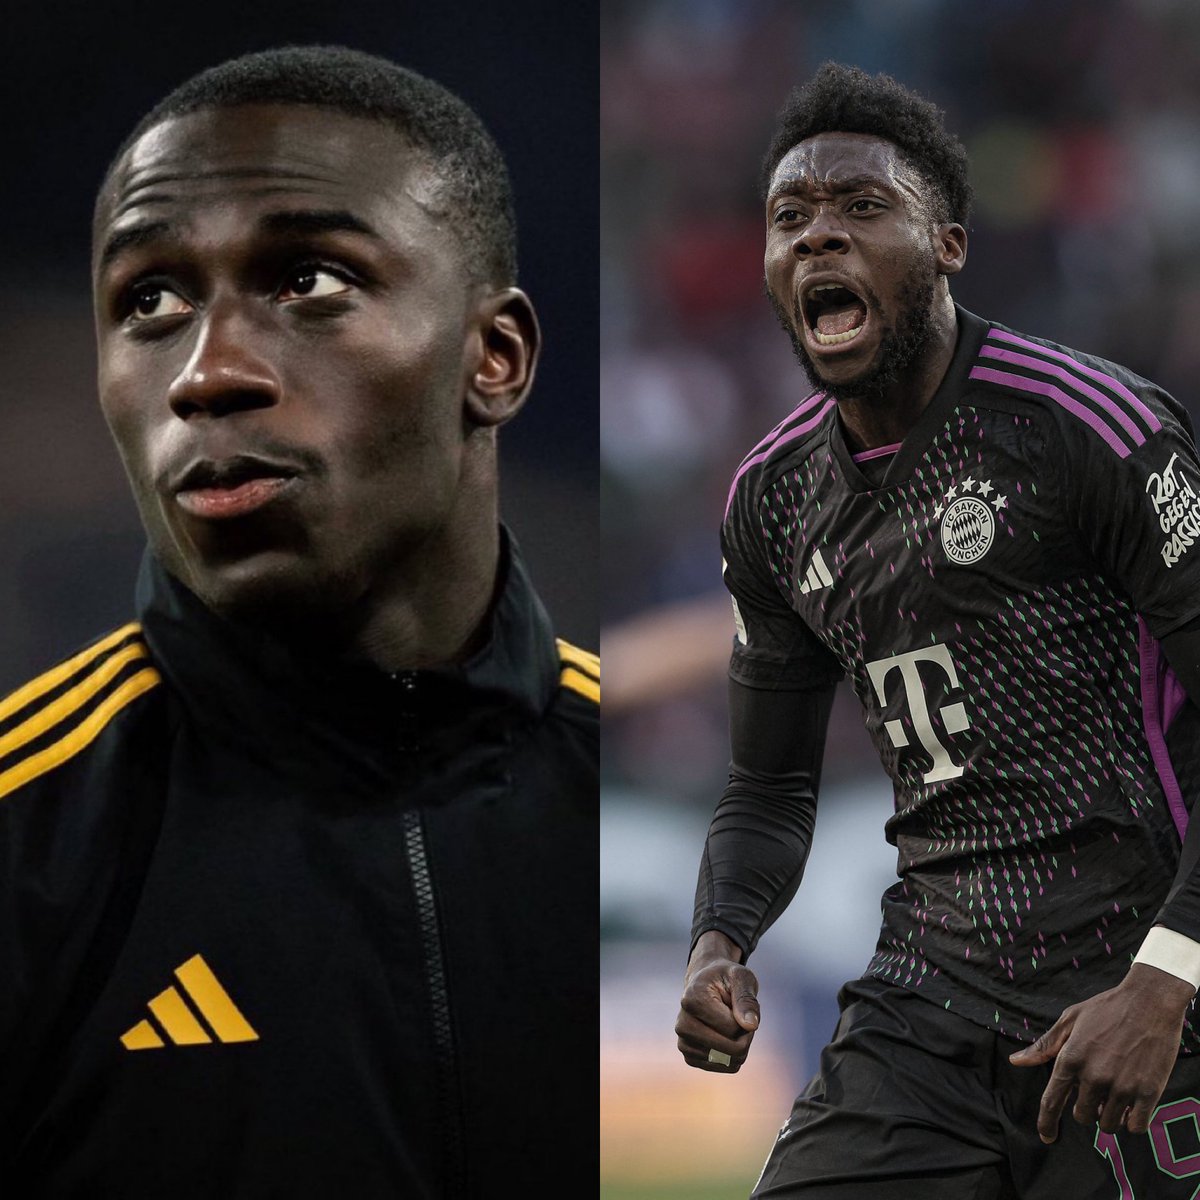 🚨 Carlo Ancelotti wants to keep Ferland Mendy and sign Alphonso Davies this summer! 😳 (Source: @relevo)